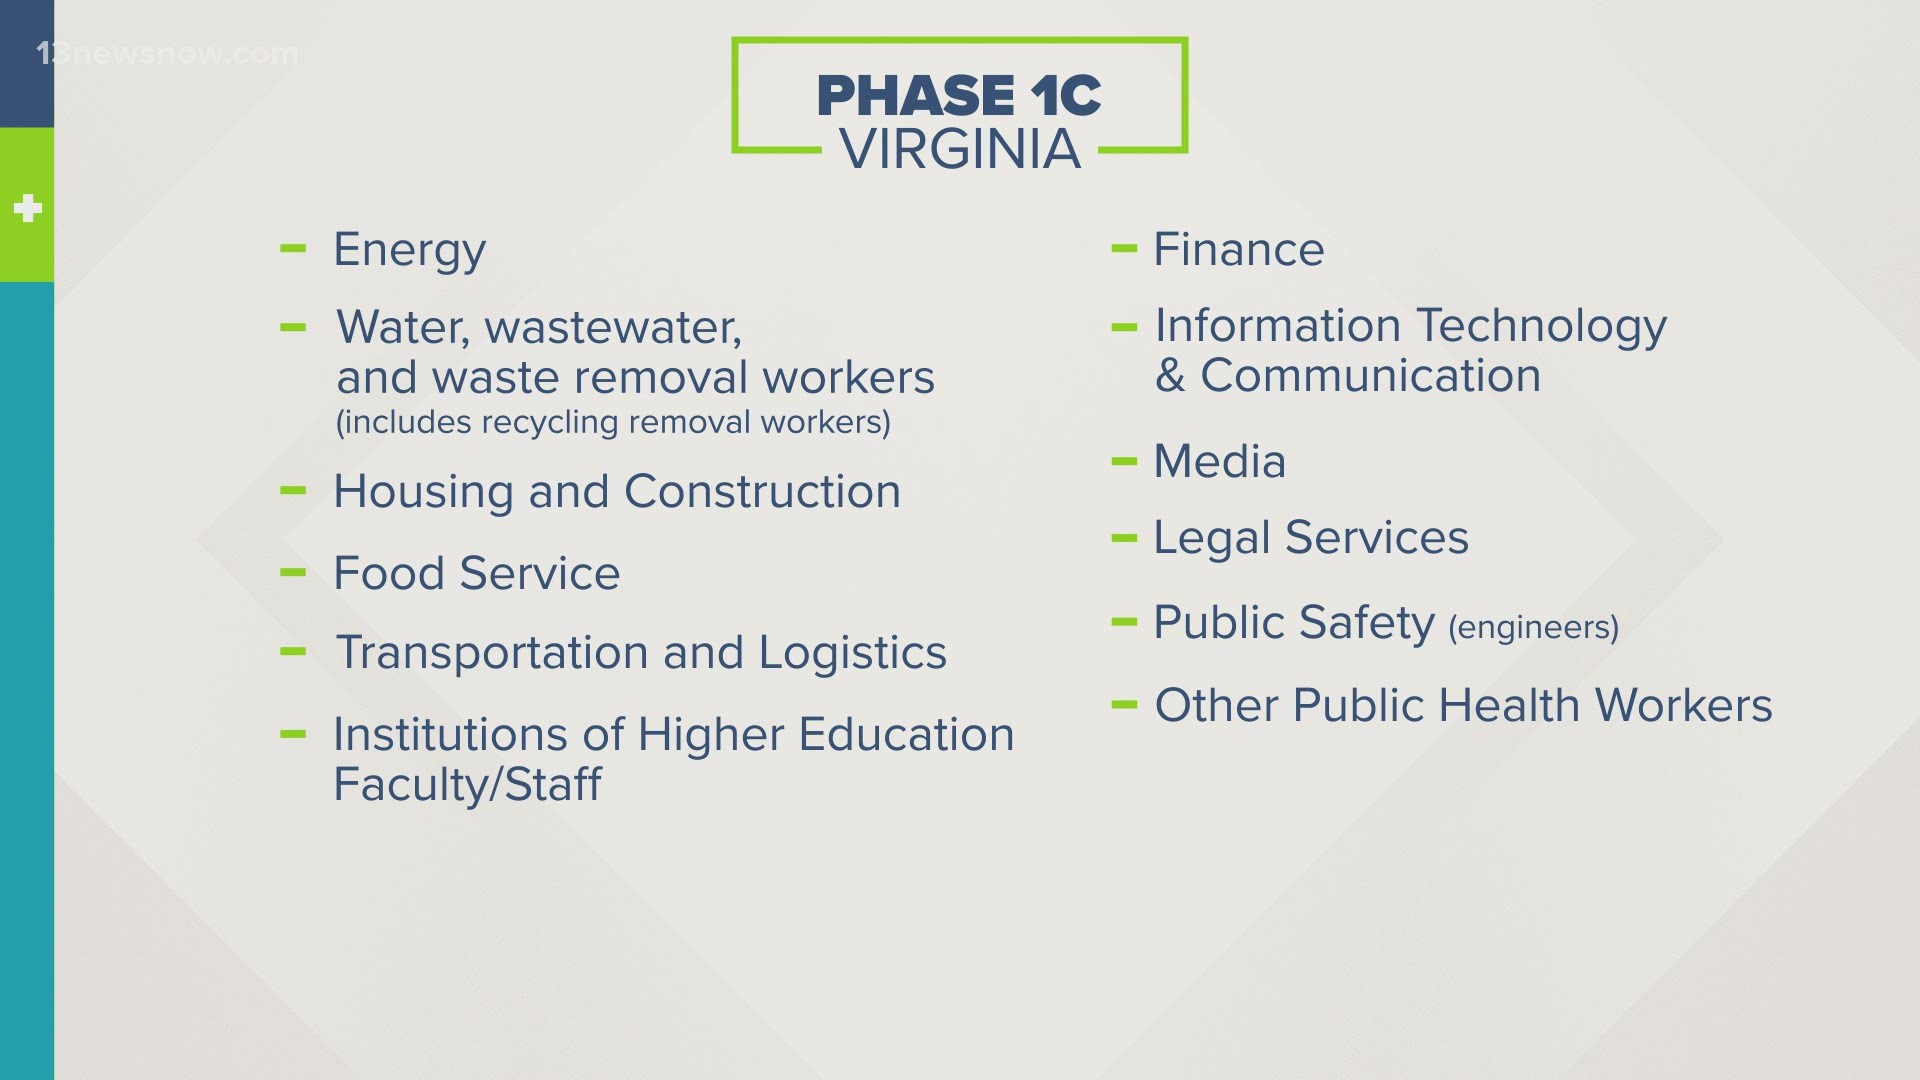 Phase 1c includes other essential workers not included in the previous phases.